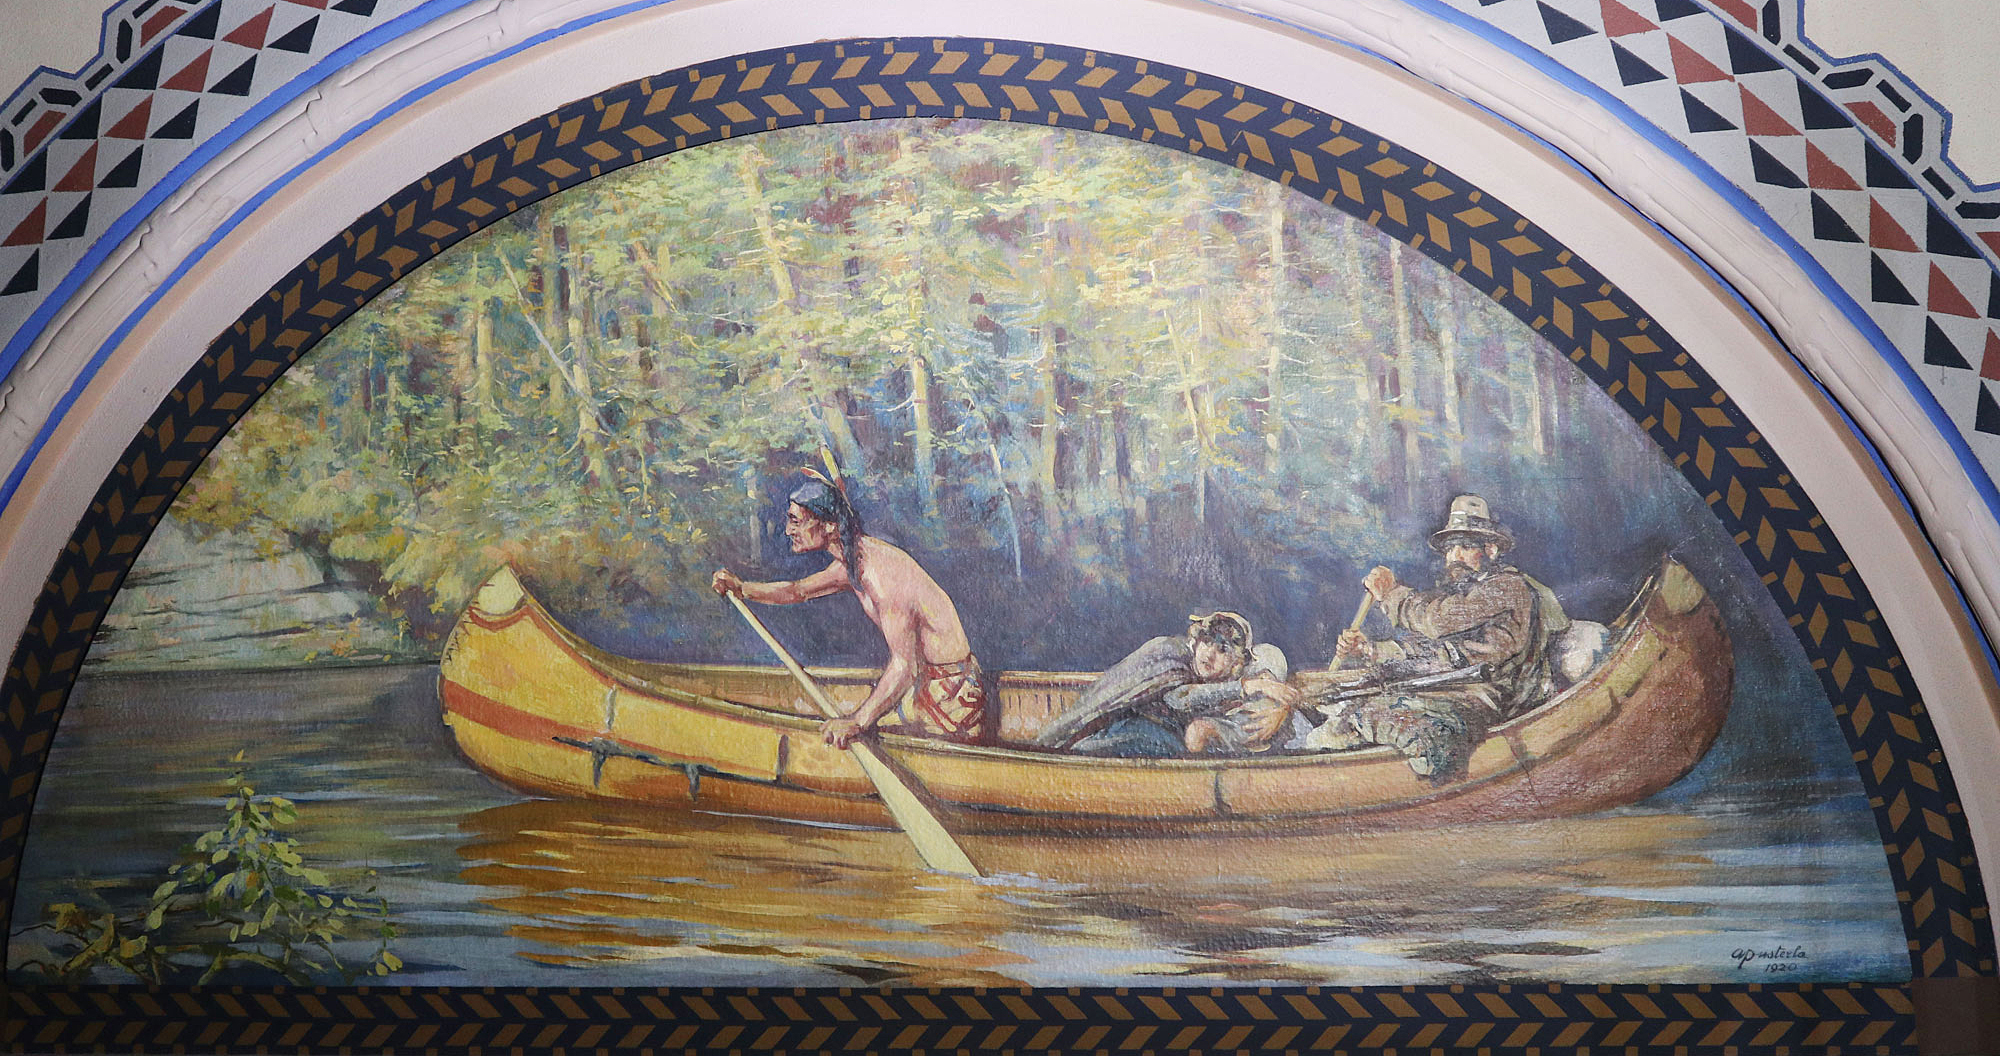 This mural by Attilio Pusterla is unofficially called Figures in a Canoe. (Photo credit: Legris Conservation Inc.)